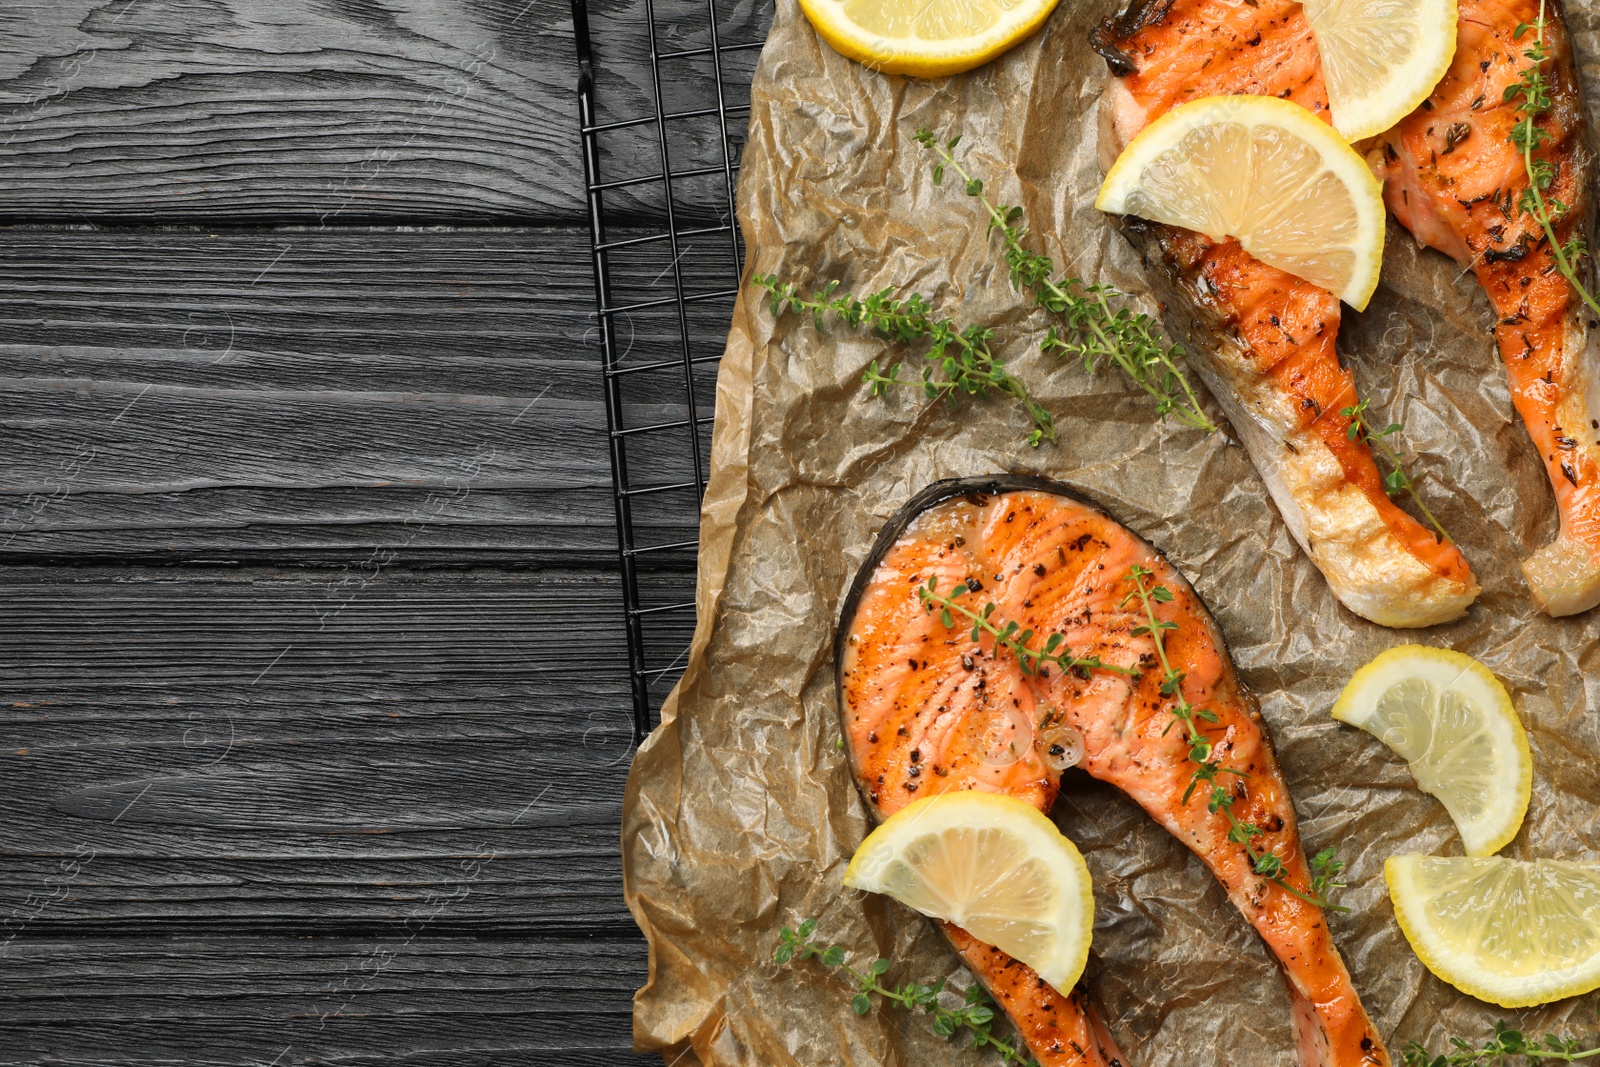 Photo of Tasty grilled salmon steaks and ingredients on black wooden table, top view. Space for text